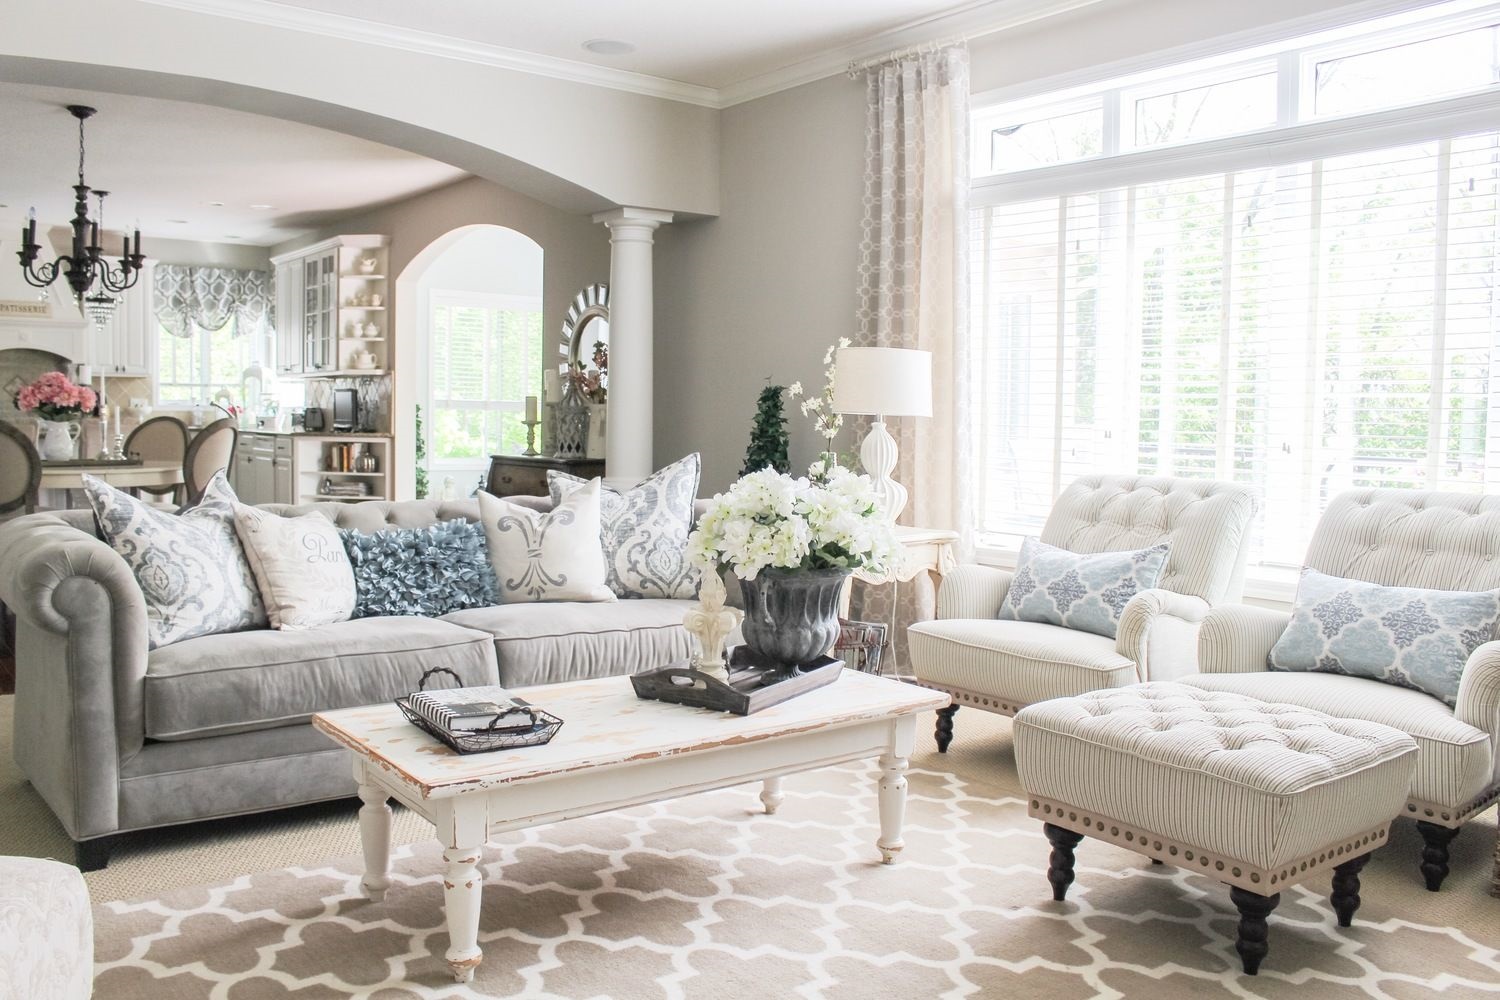 A white glamour style living room